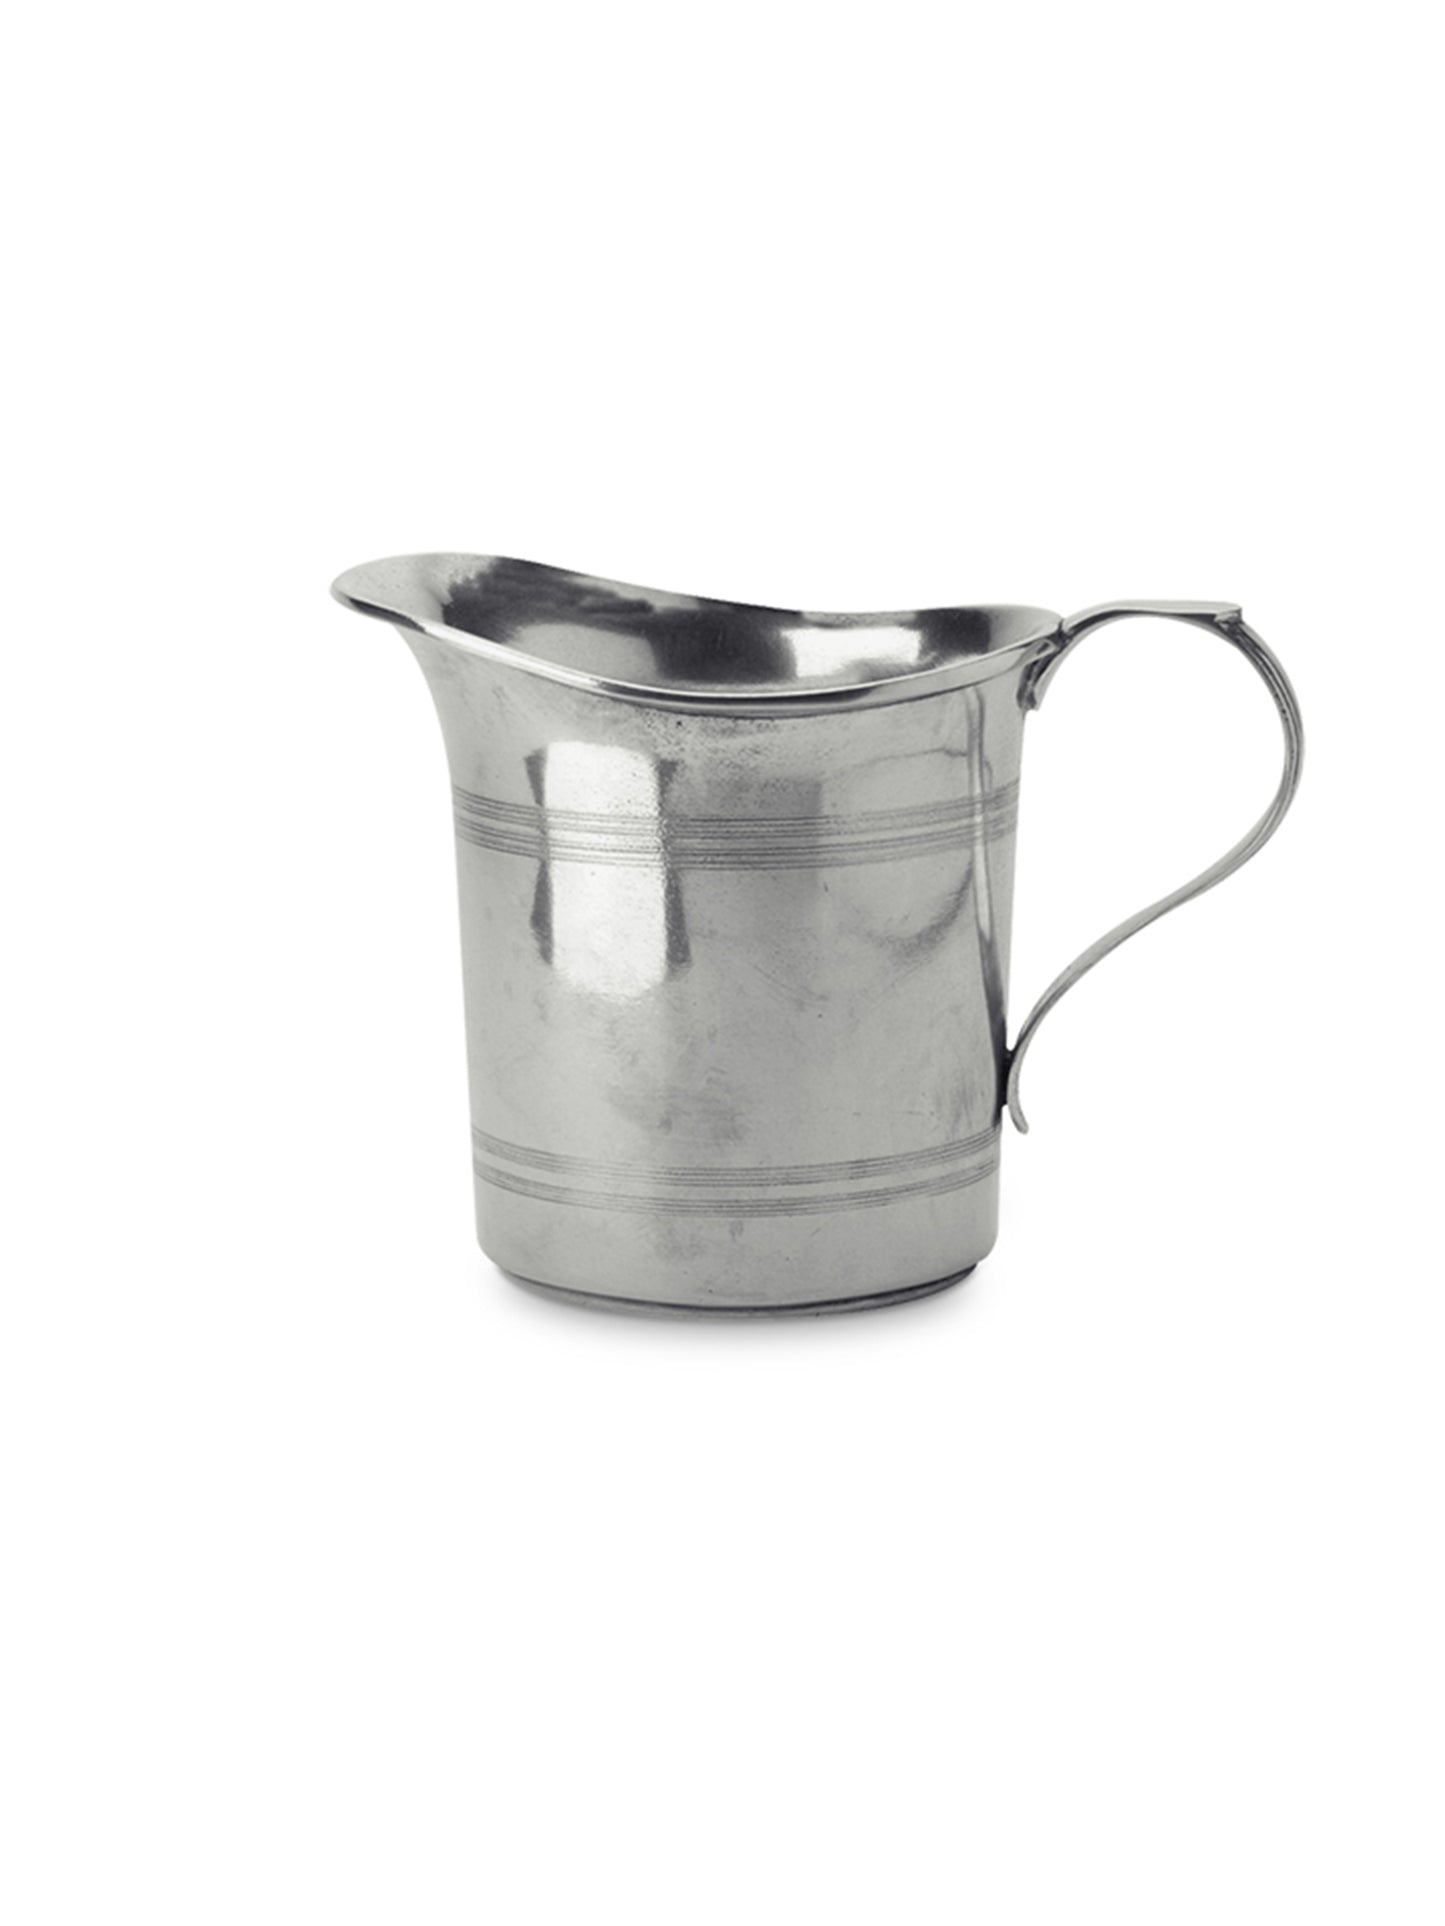 MATCH Pewter Straight Pitcher Weston Table